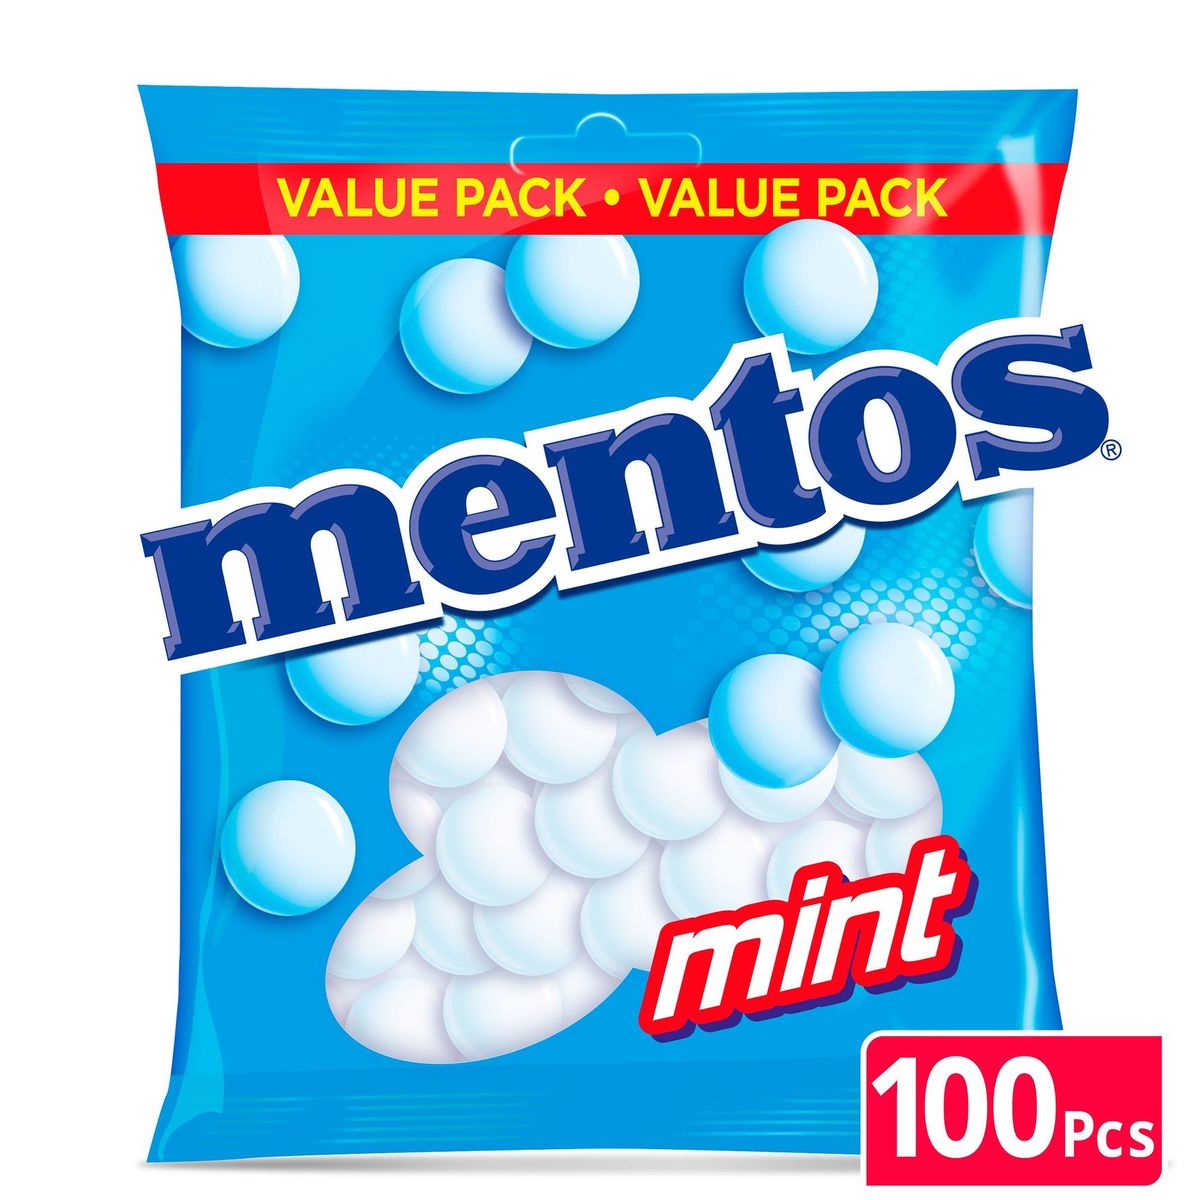 Mentos Chewy Dragees Mint 300 g